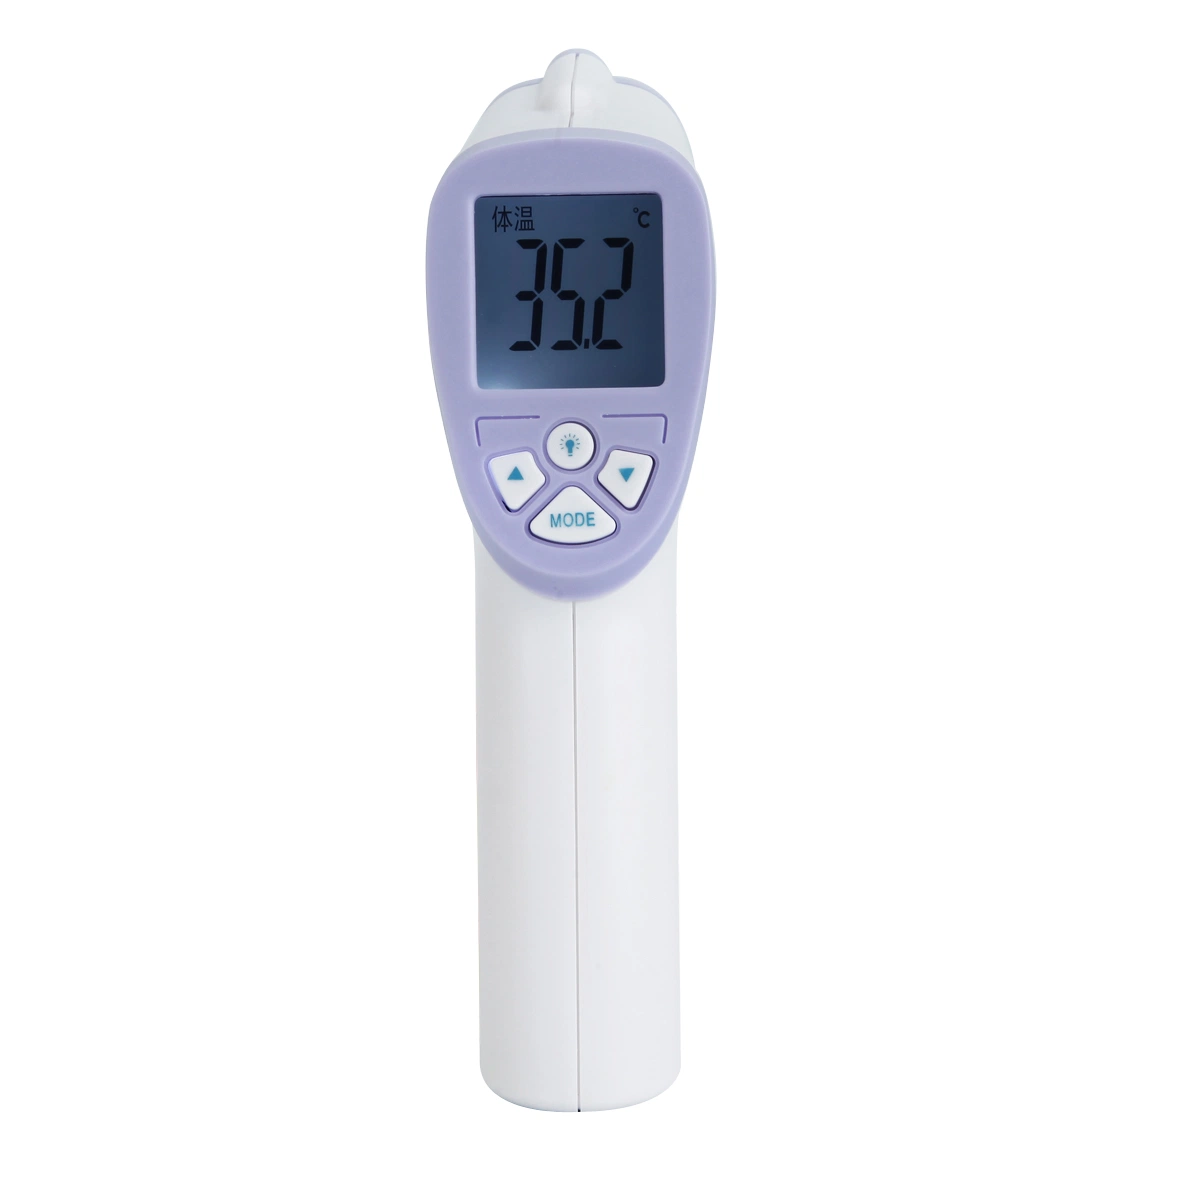 Body Temperature Measurement Instrument Infrared Thermometer Fever Body